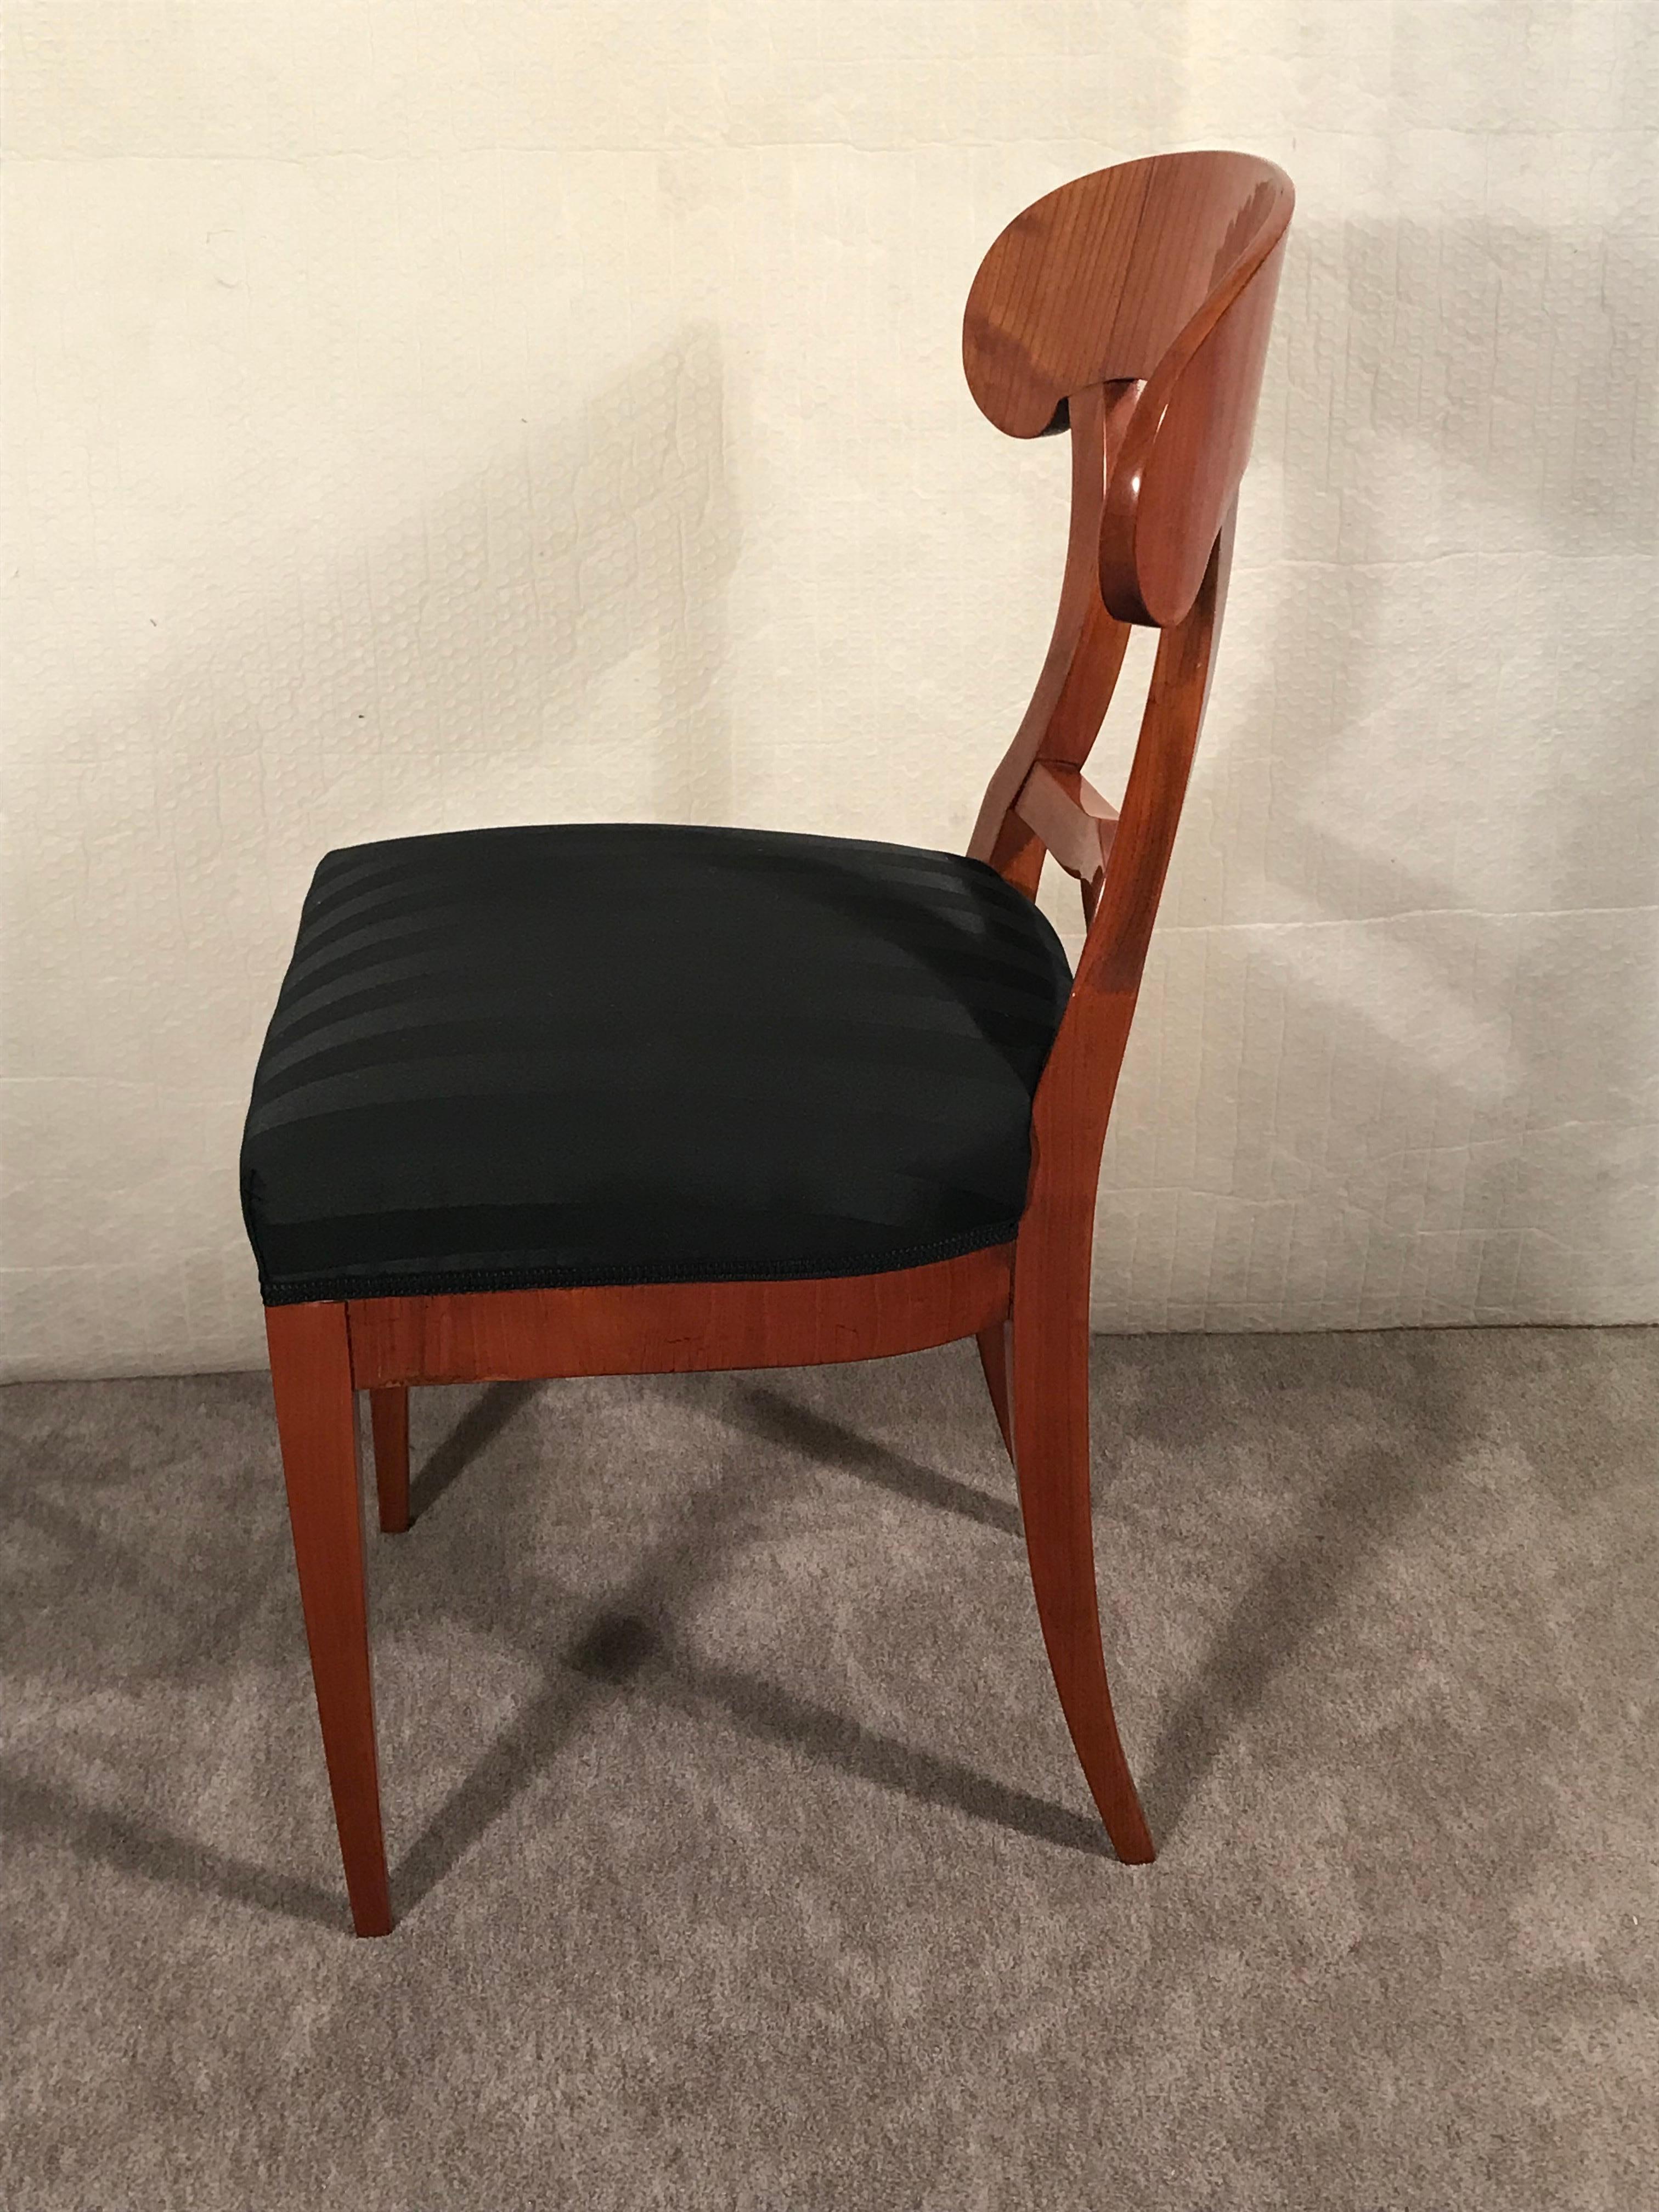 Early 19th Century Set of Six Biedermeier Chairs, 1820, Cherry For Sale